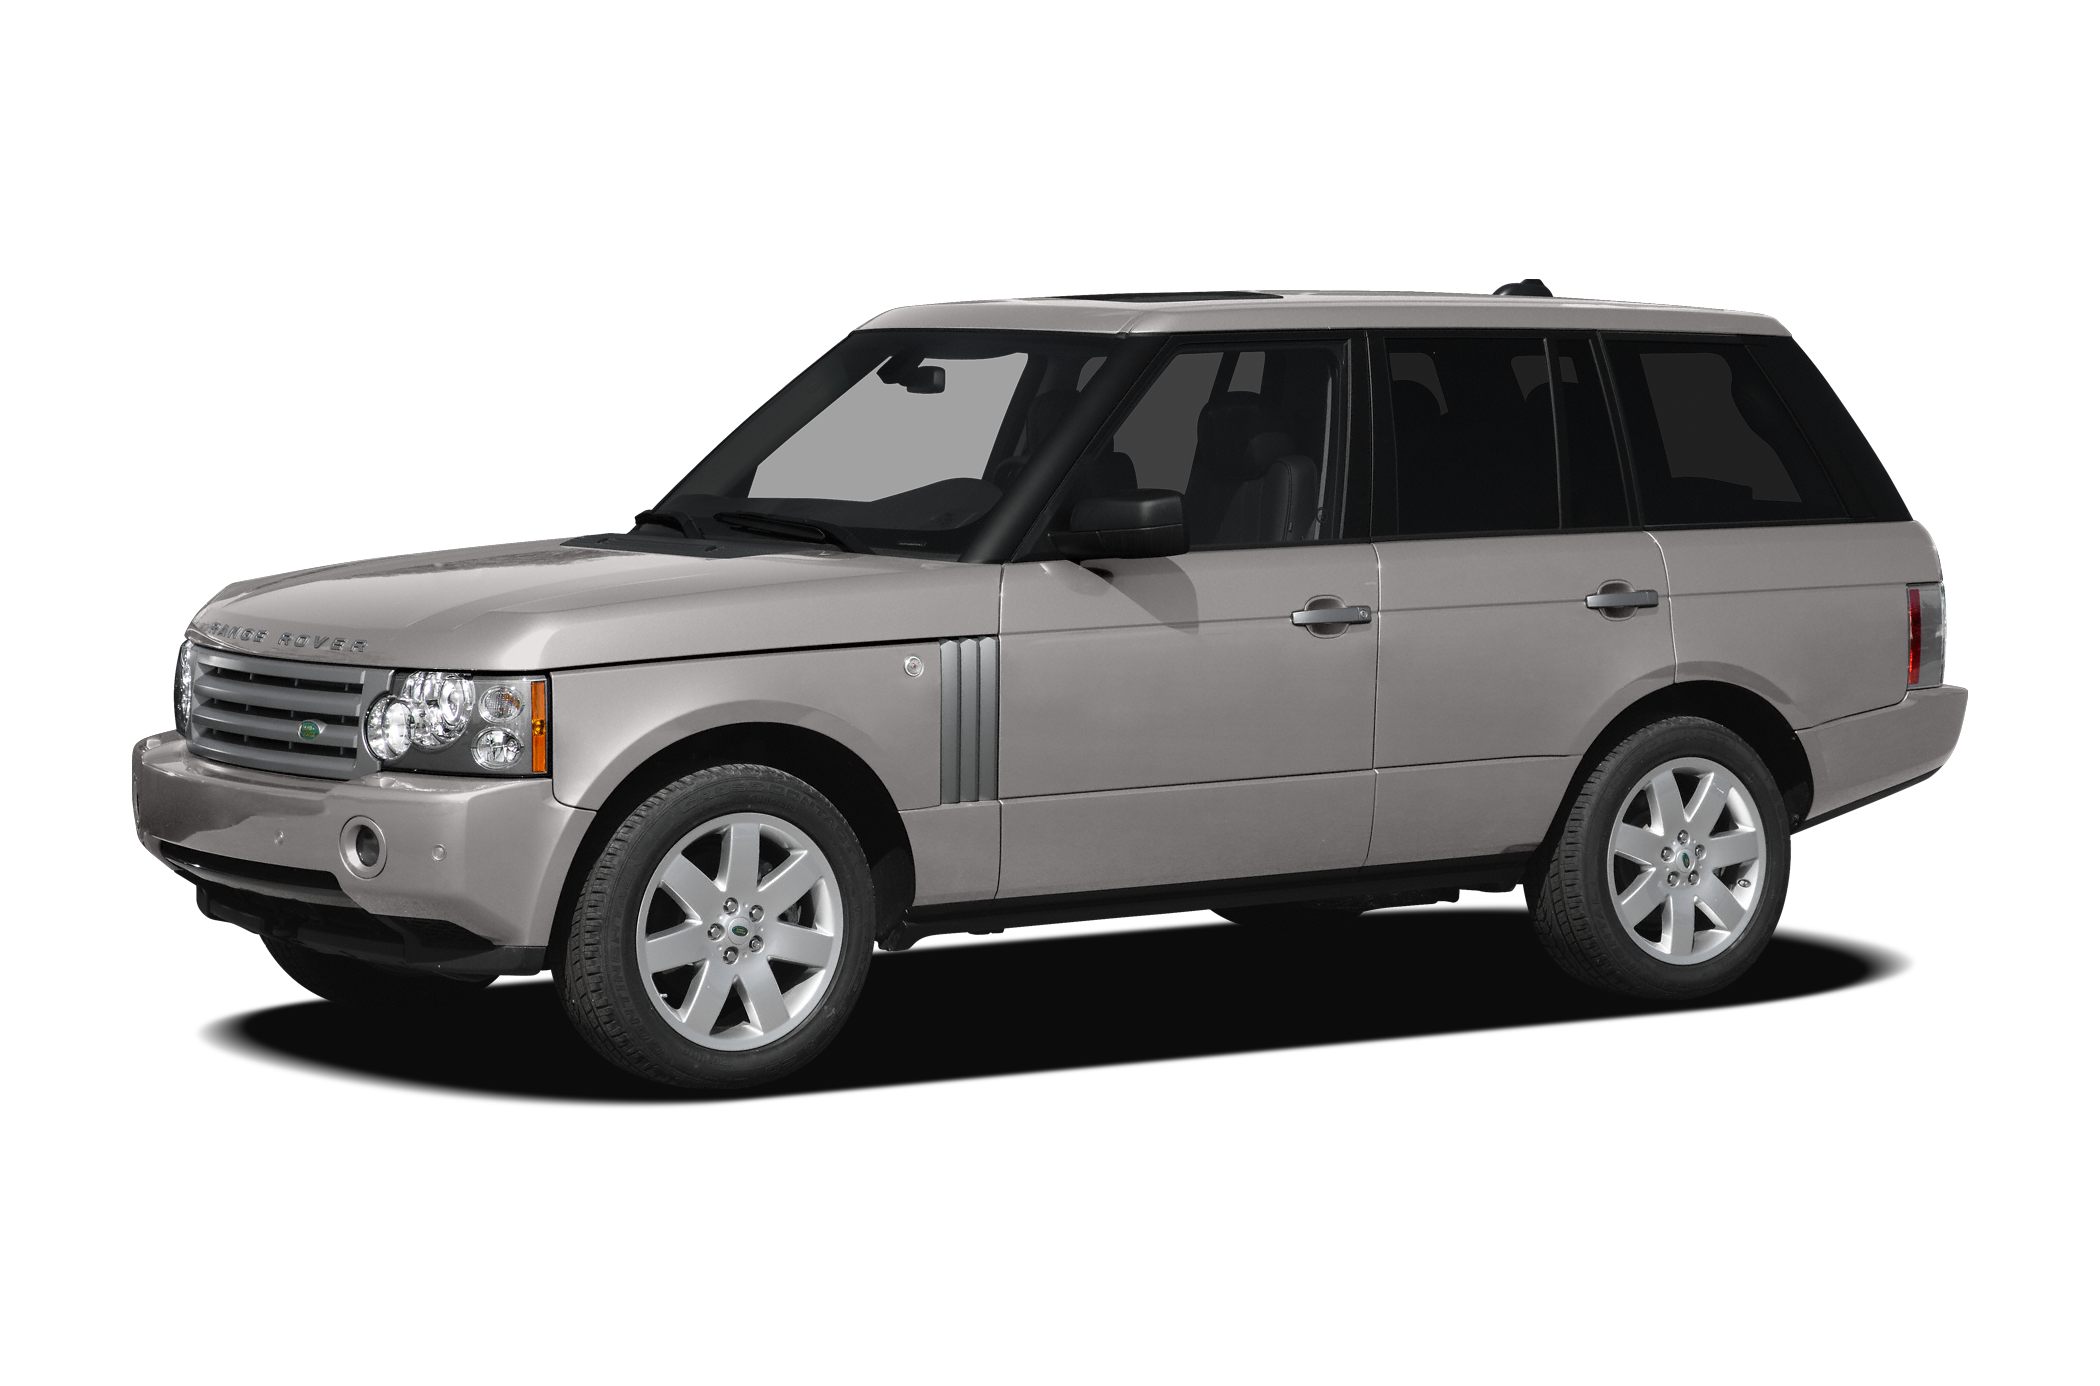 2008 Range Rover Hse Original Price  - The Average Listed Price Is Aed.